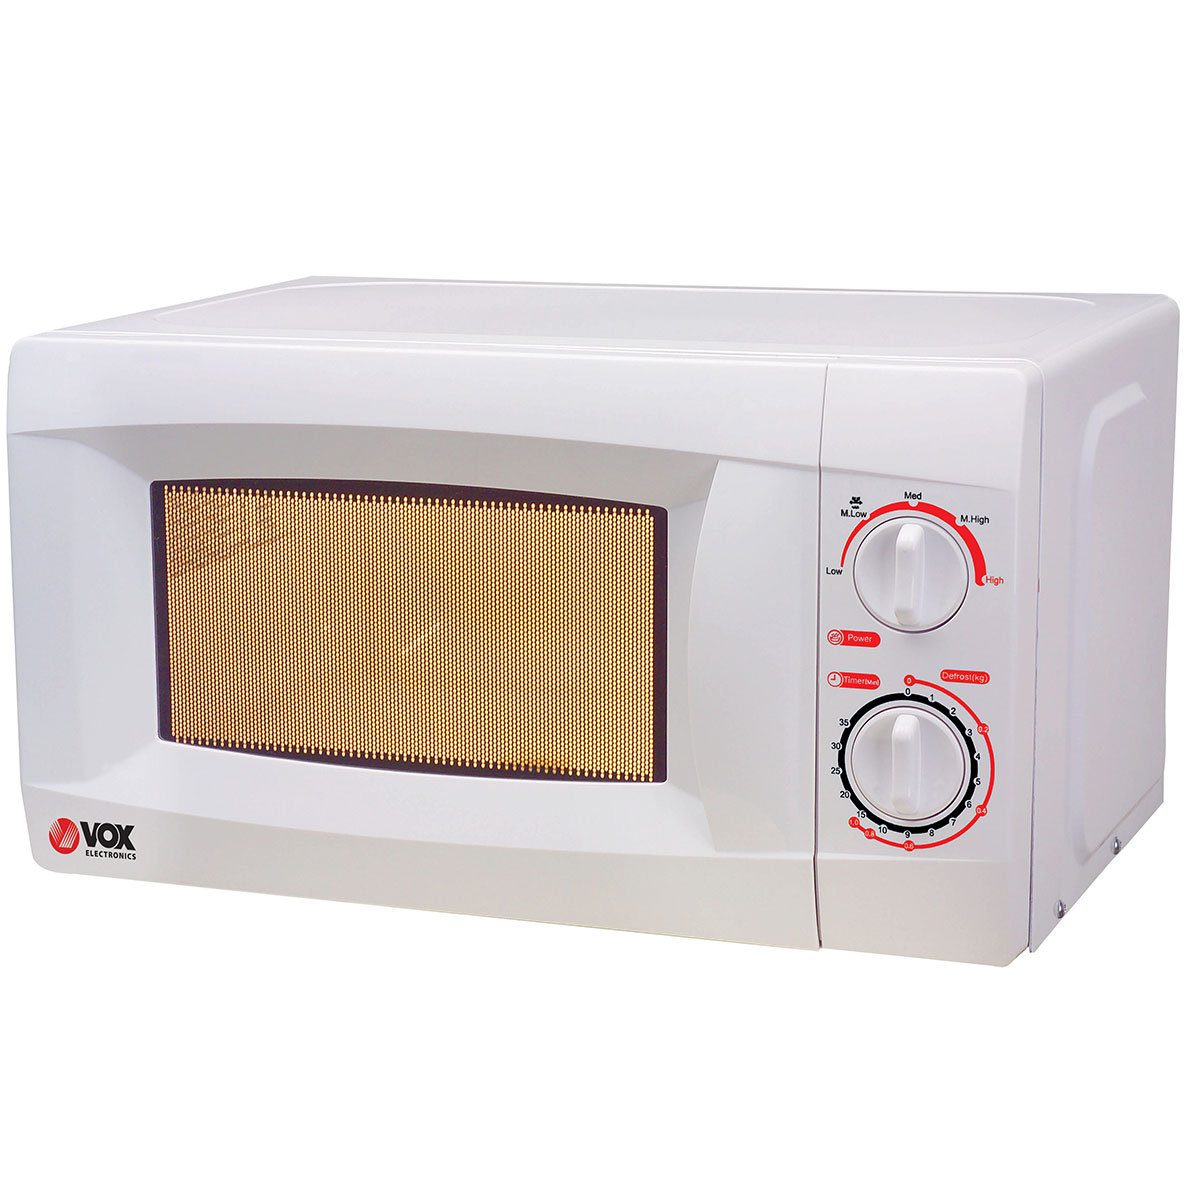 Microwave ovens for better efficiency in your kitchen | VOX Electronics